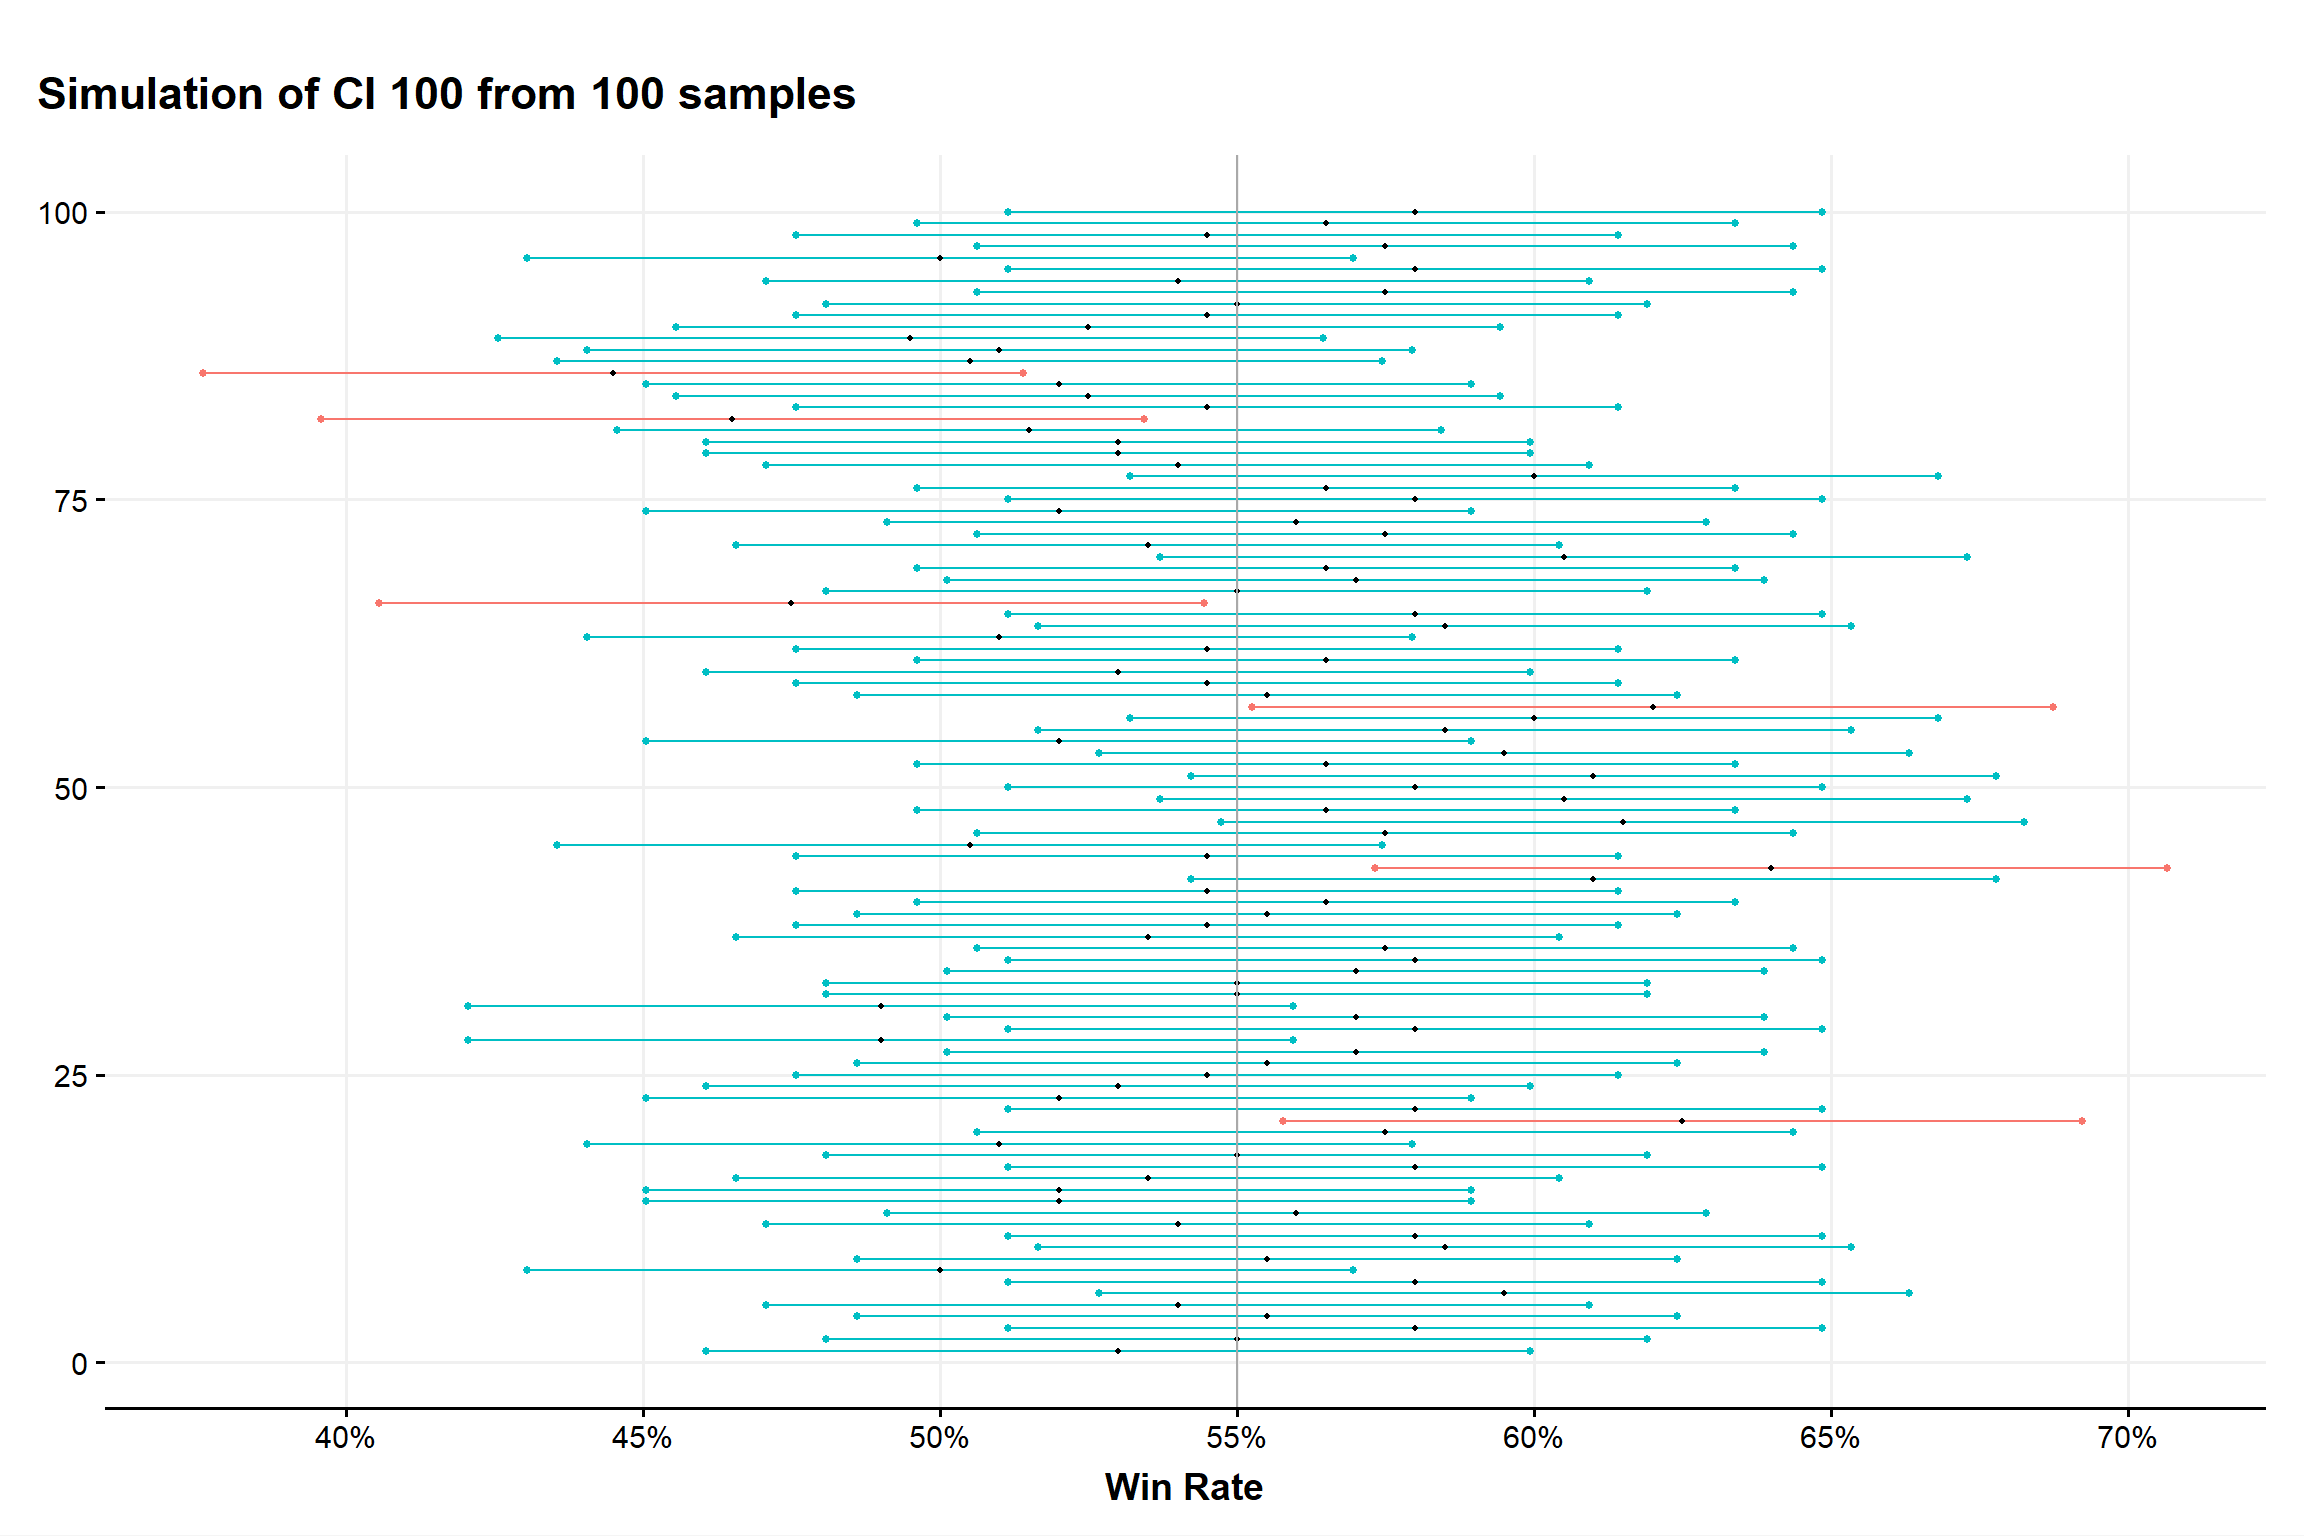 simulation of 100 samples of their own CI